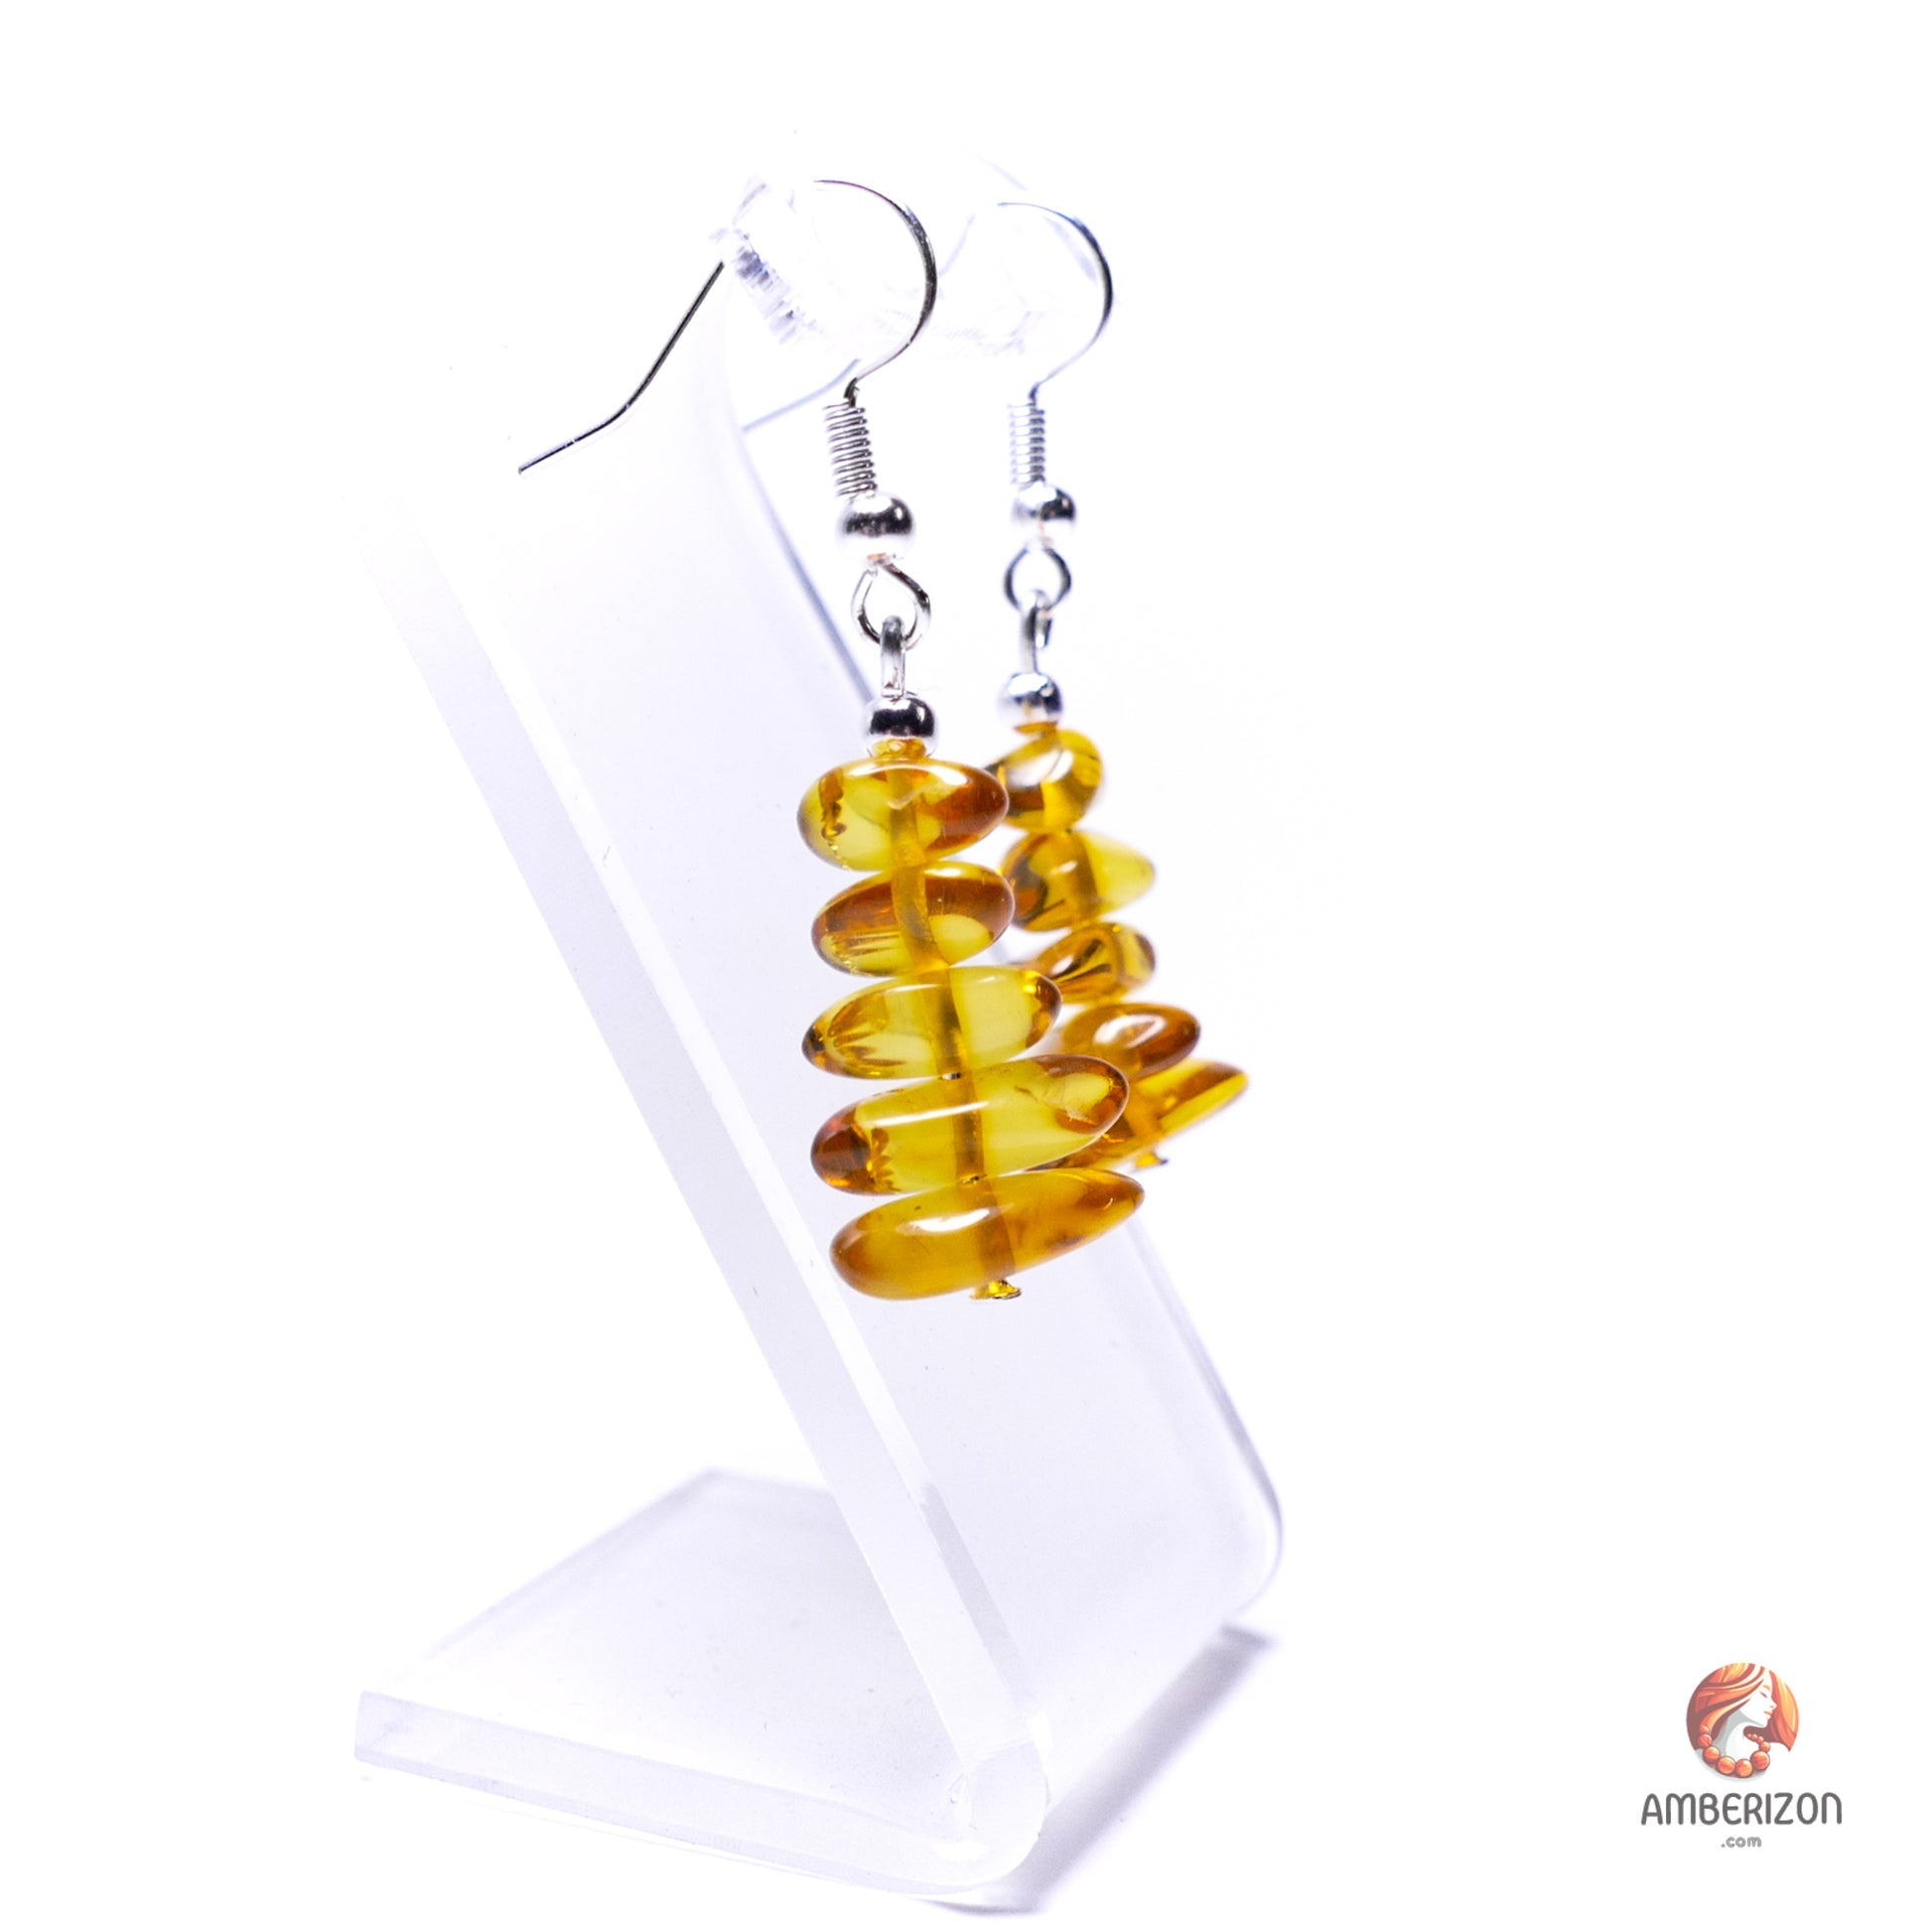 Baltic amber chip earrings - Smooth translucent beads